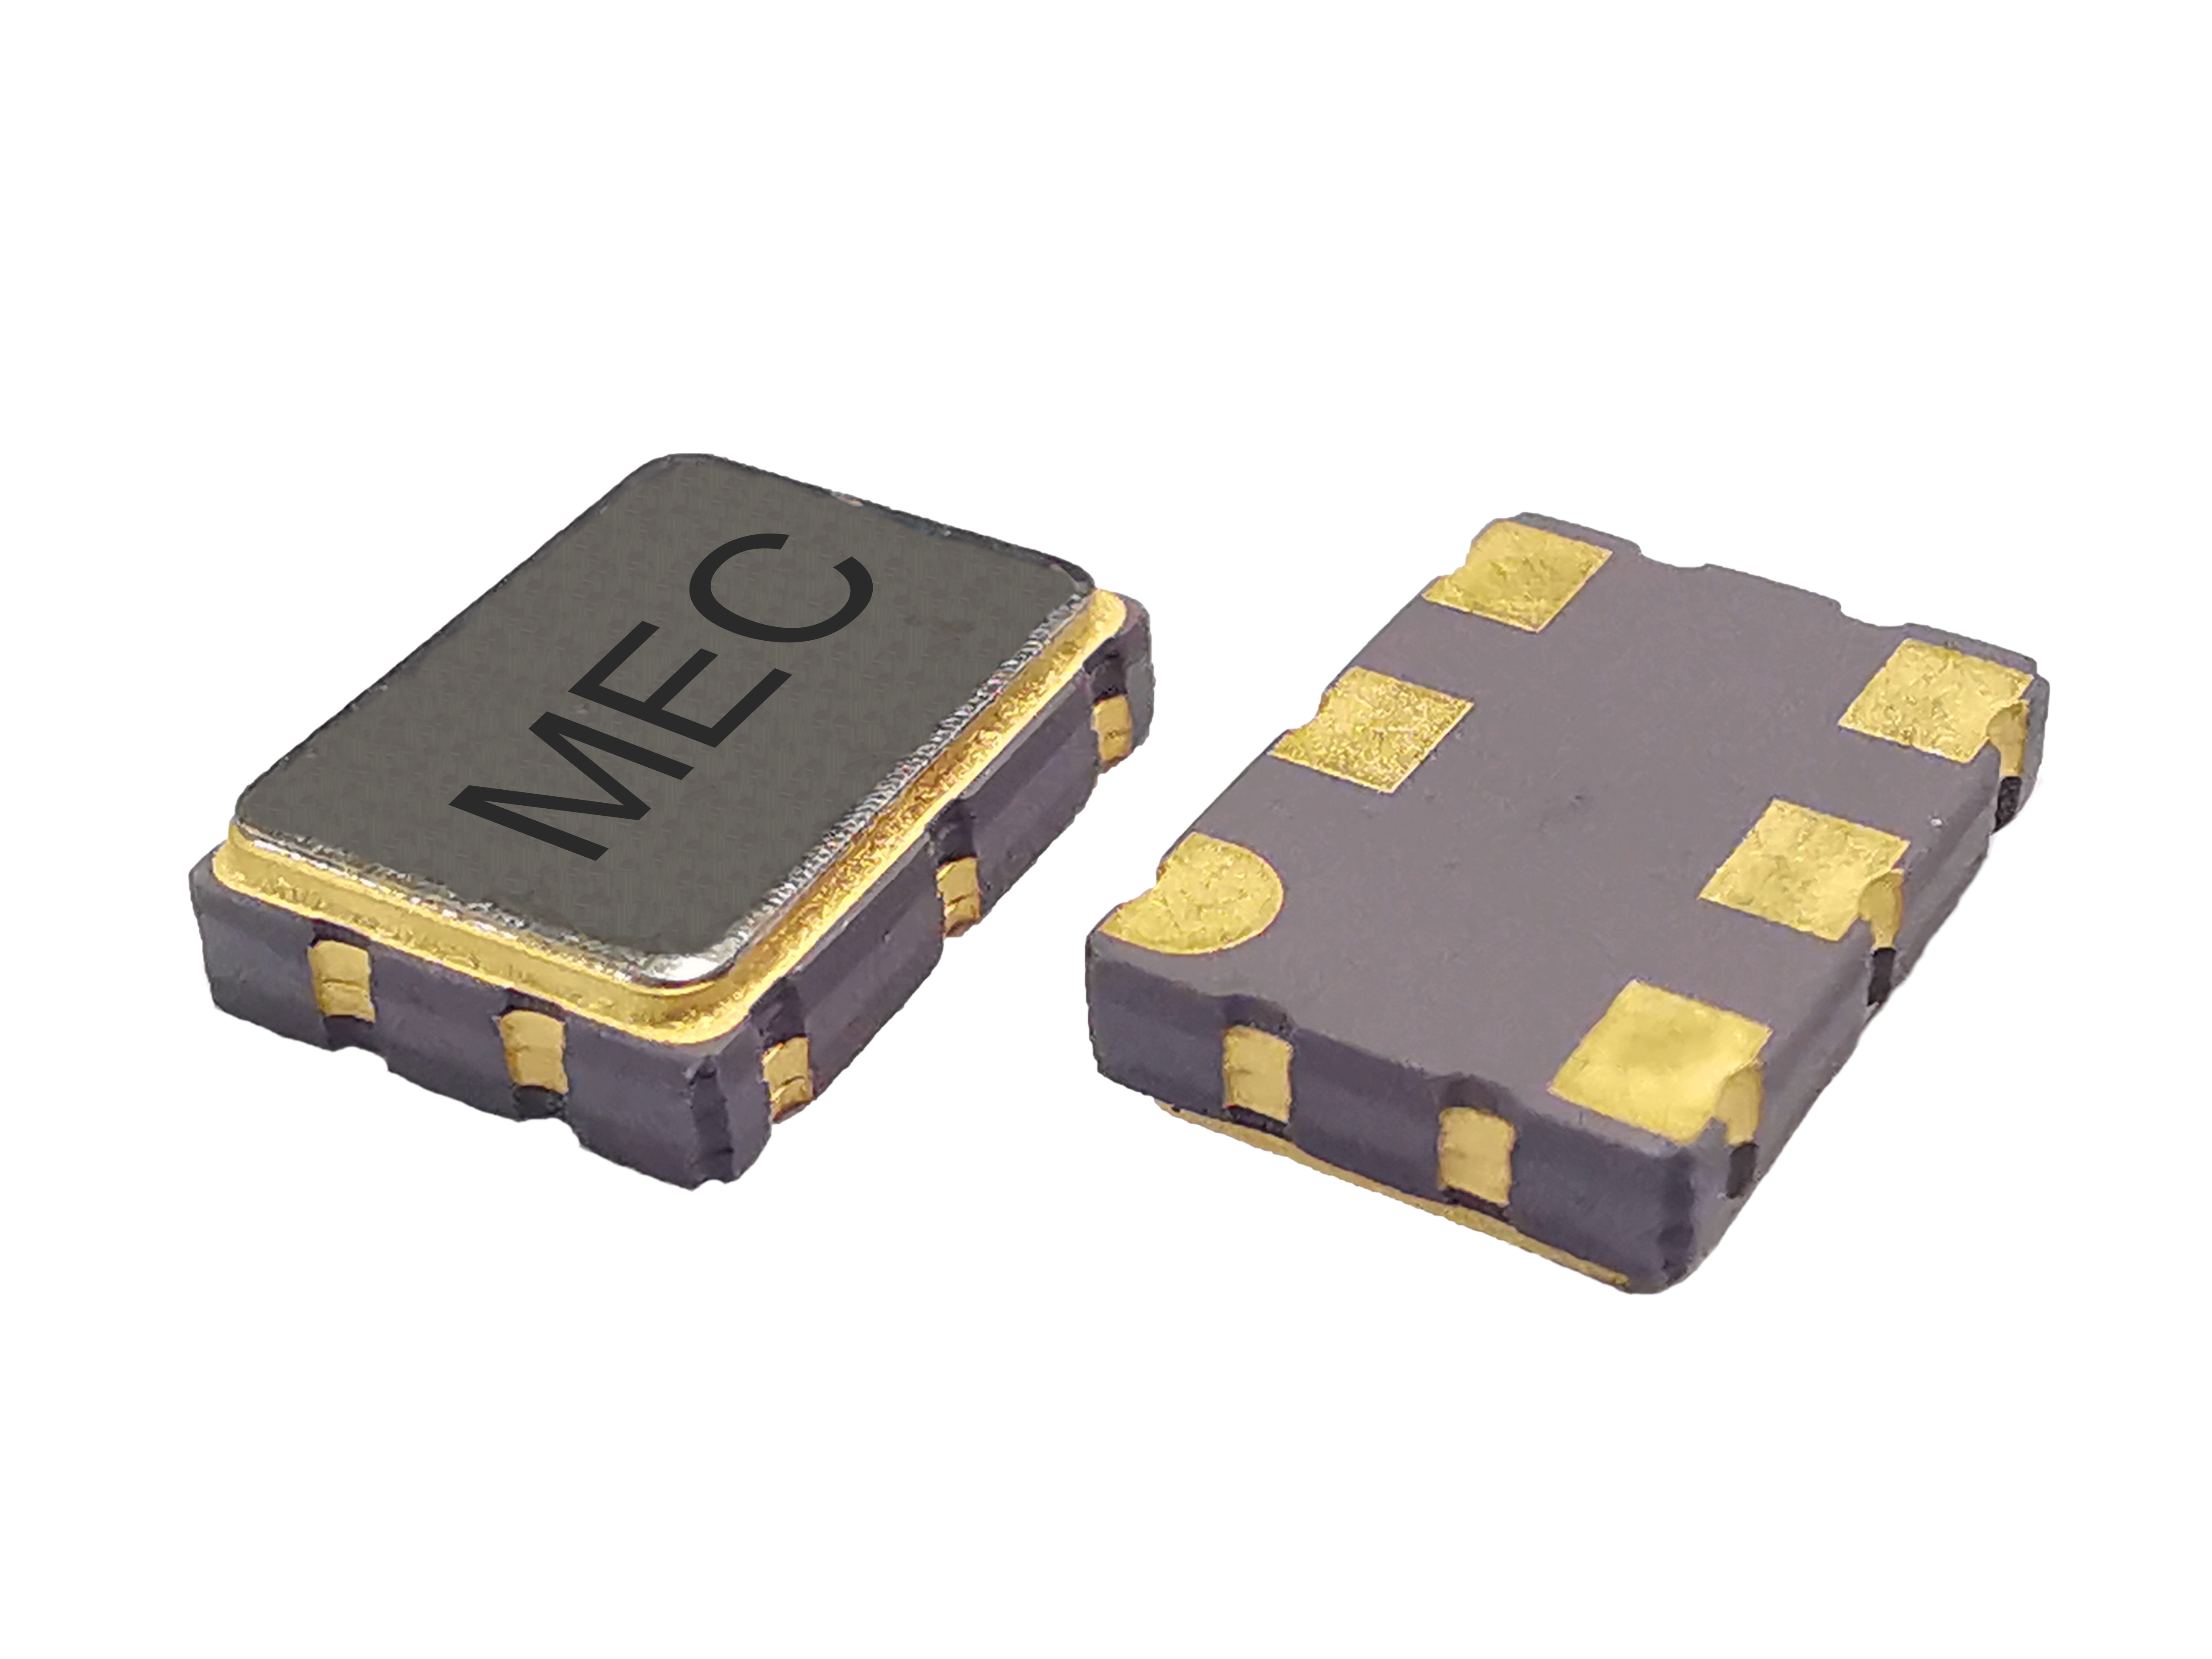 HCTQF576 7050 2.5V Quick-Turn Programmable Frequency Swithable CMOS  SMD Crystal Oscillator